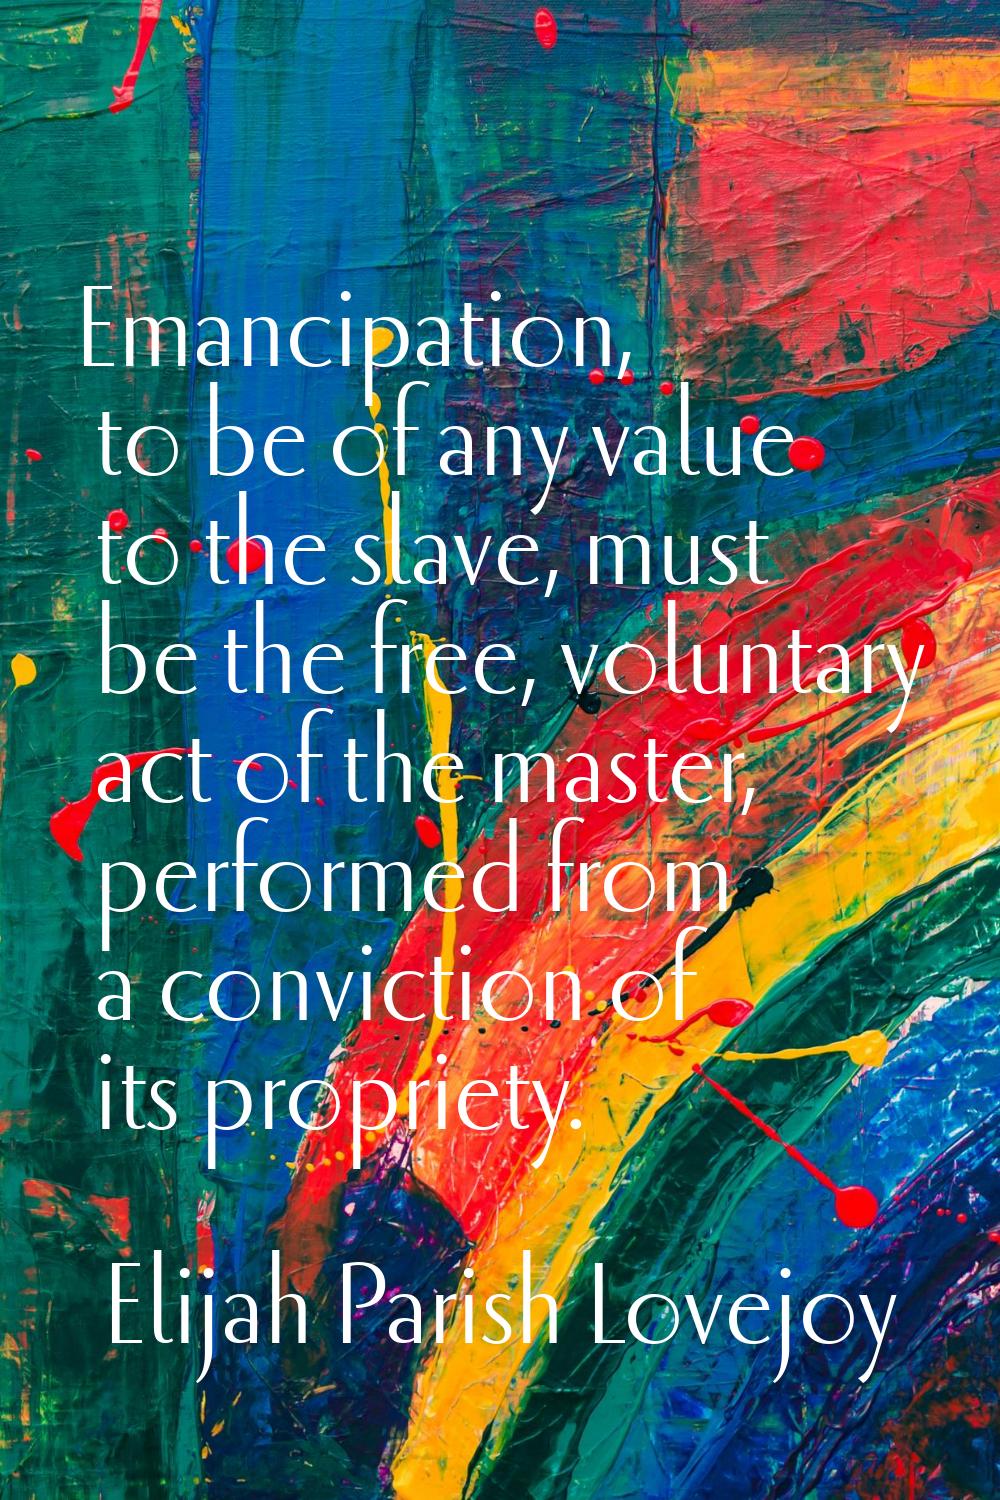 Emancipation, to be of any value to the slave, must be the free, voluntary act of the master, perfo